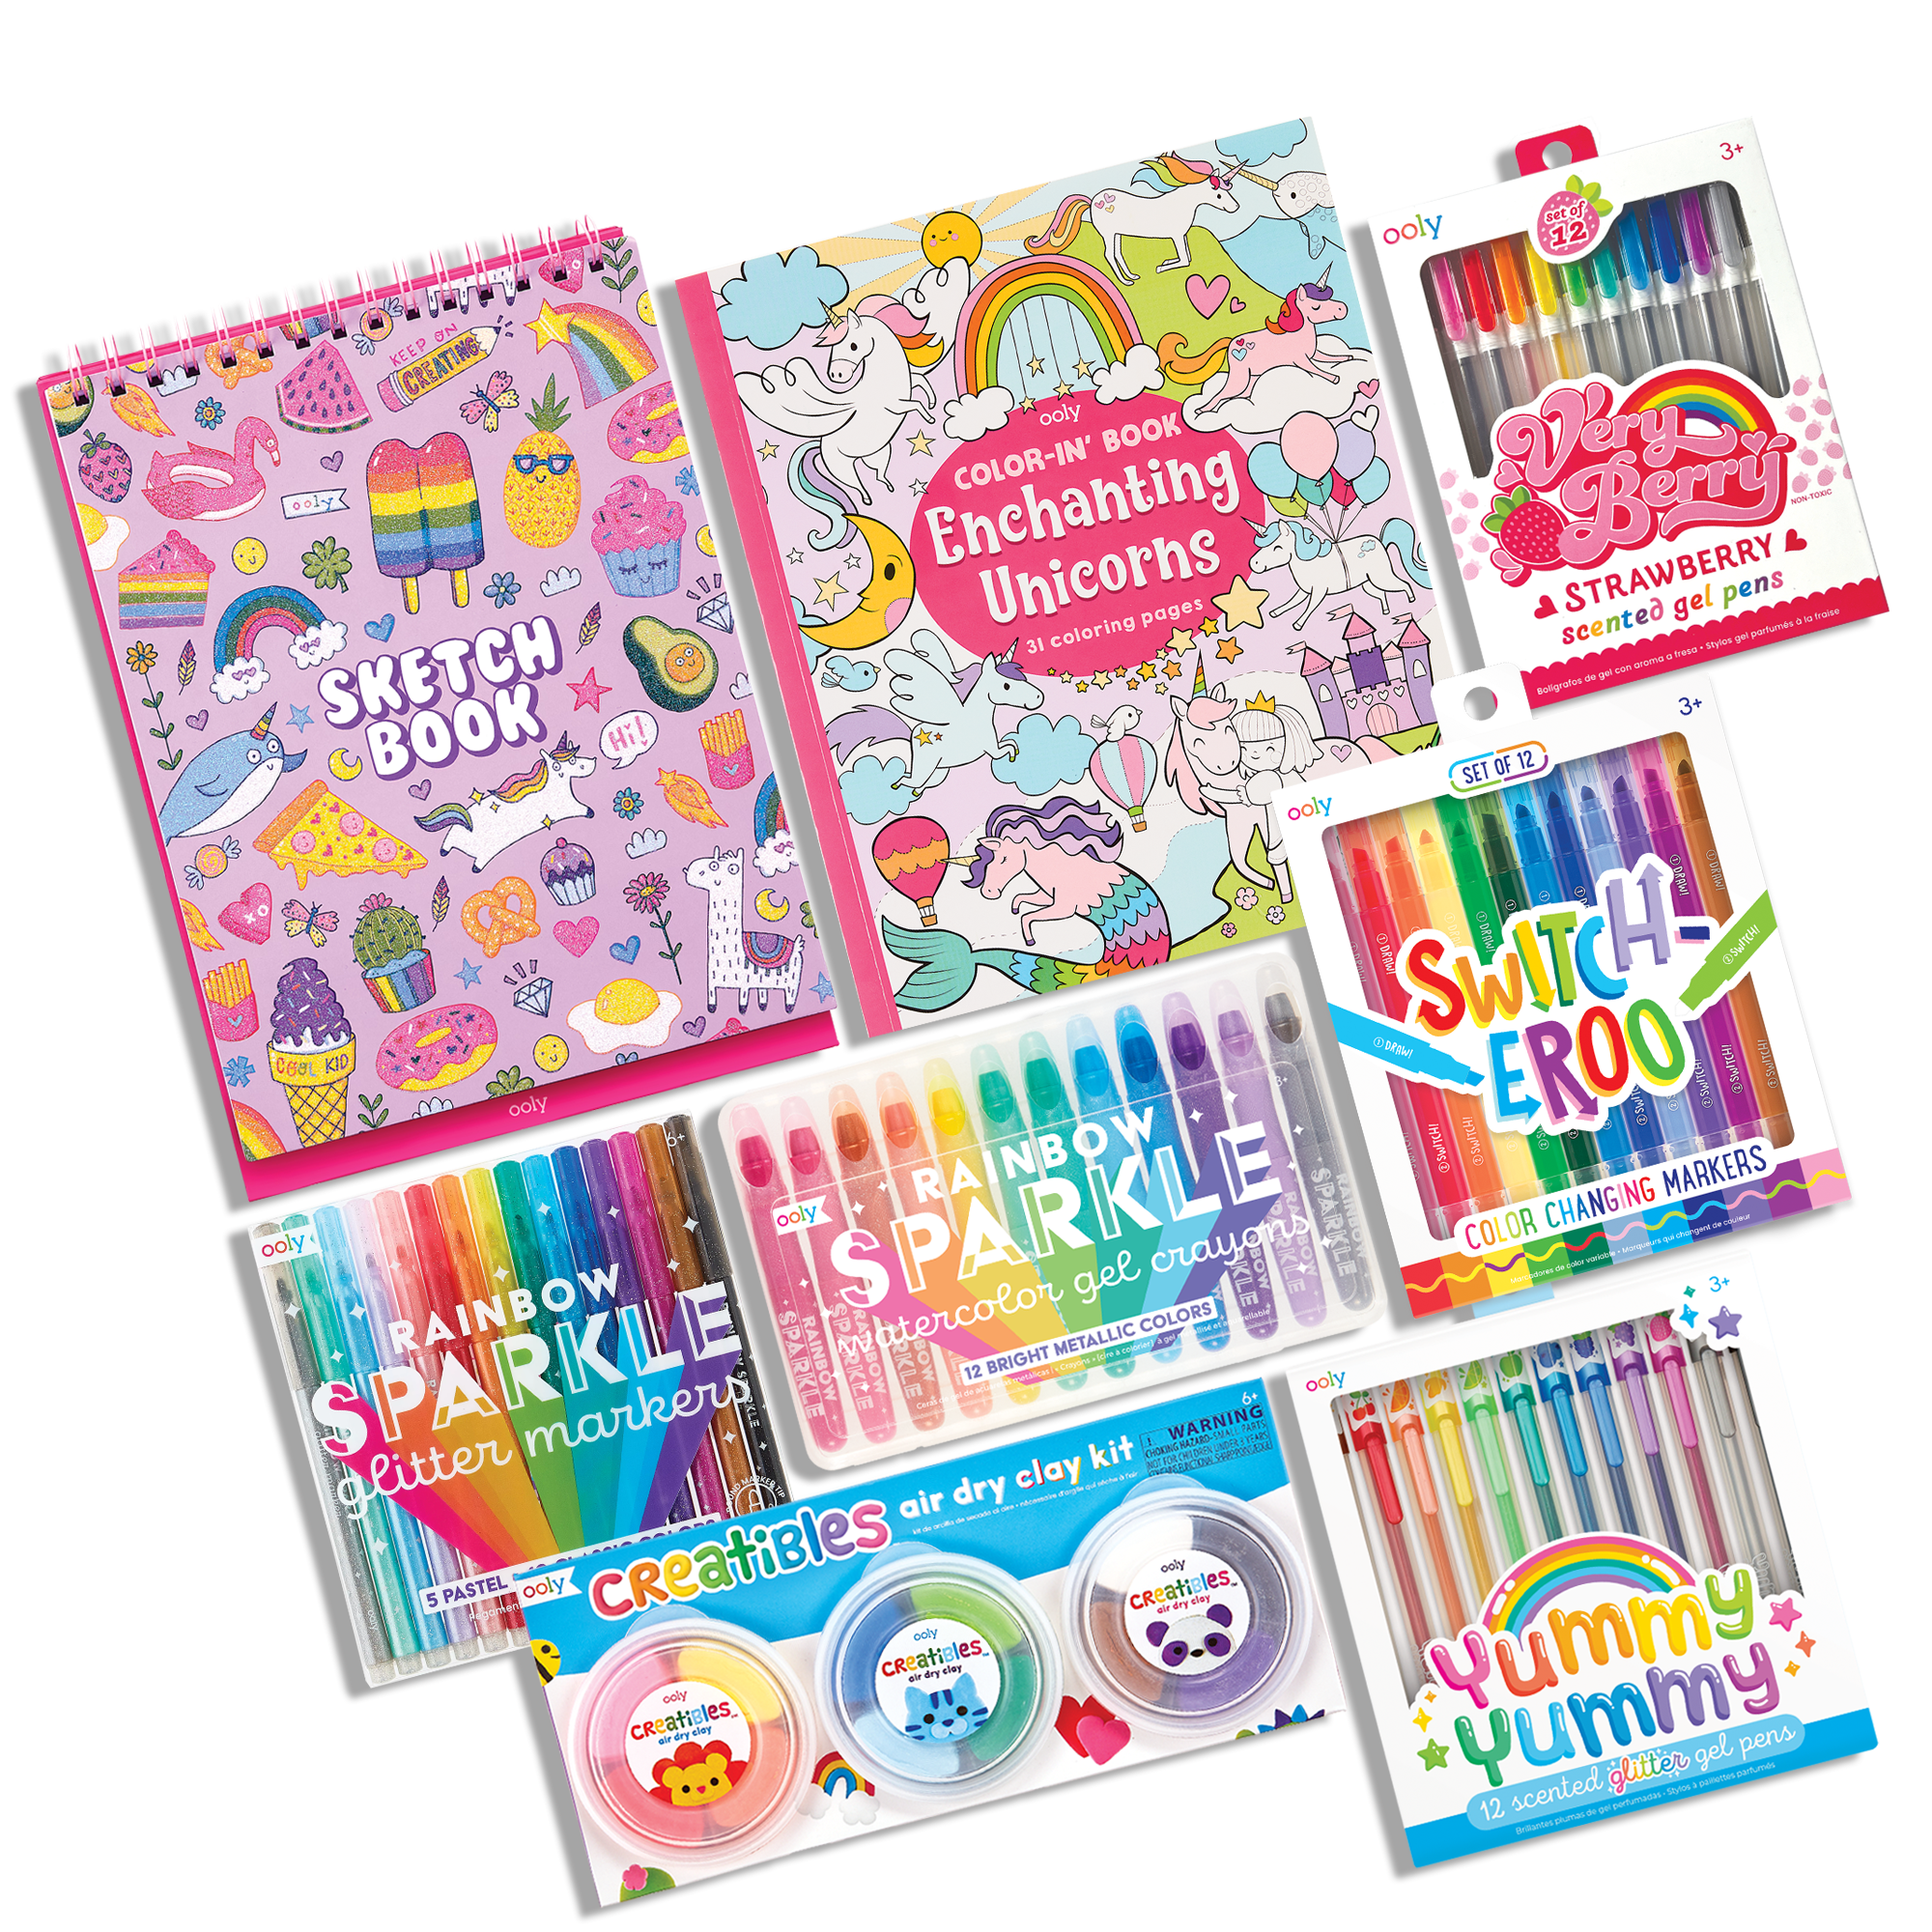 Ooly Creatibles Air Dry Clay Kit